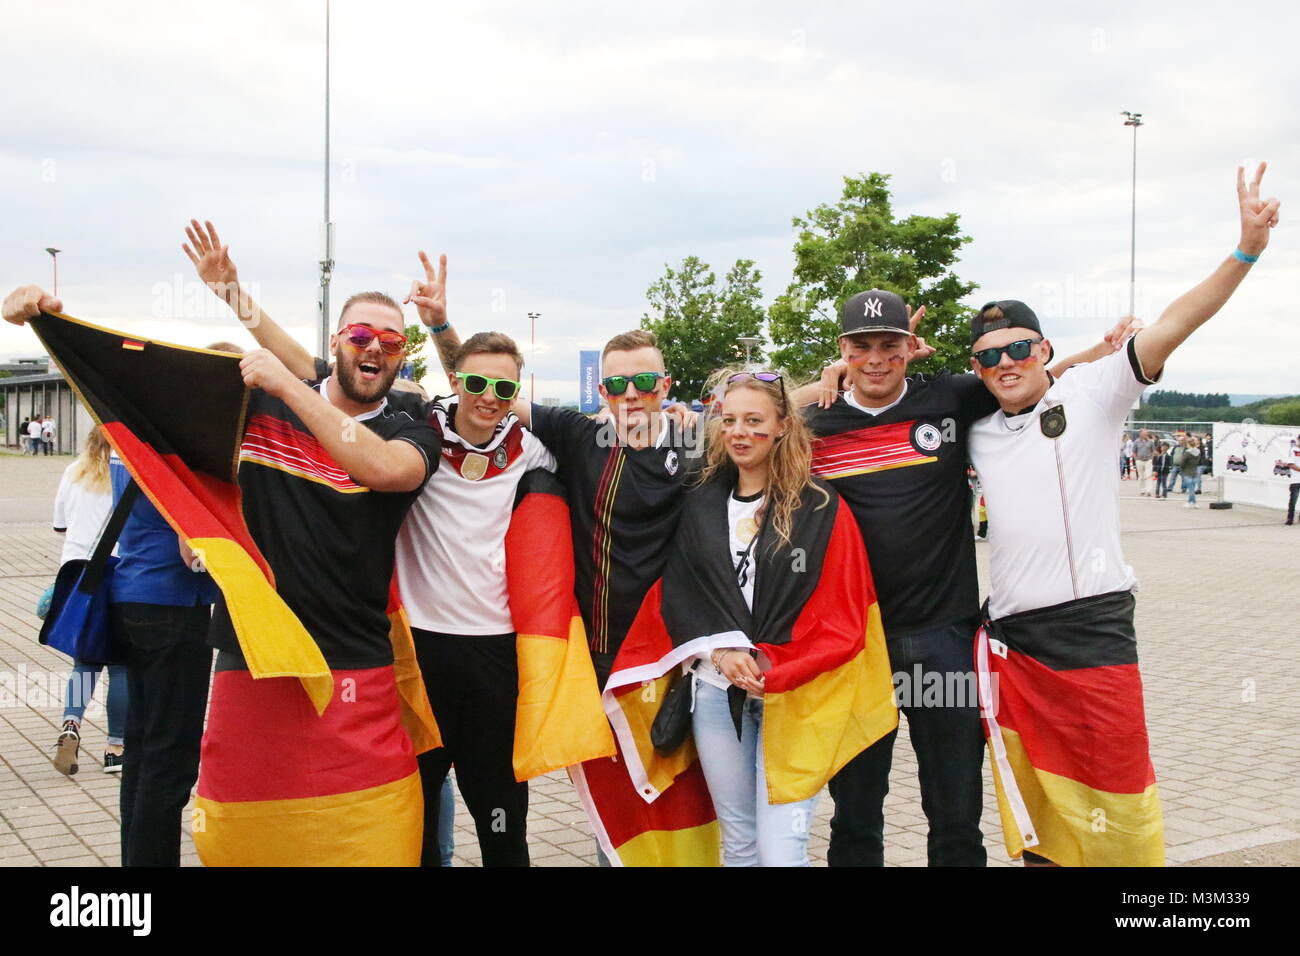 Fußball Gucken In Freiburg High Resolution Stock Photography and Images -  Alamy